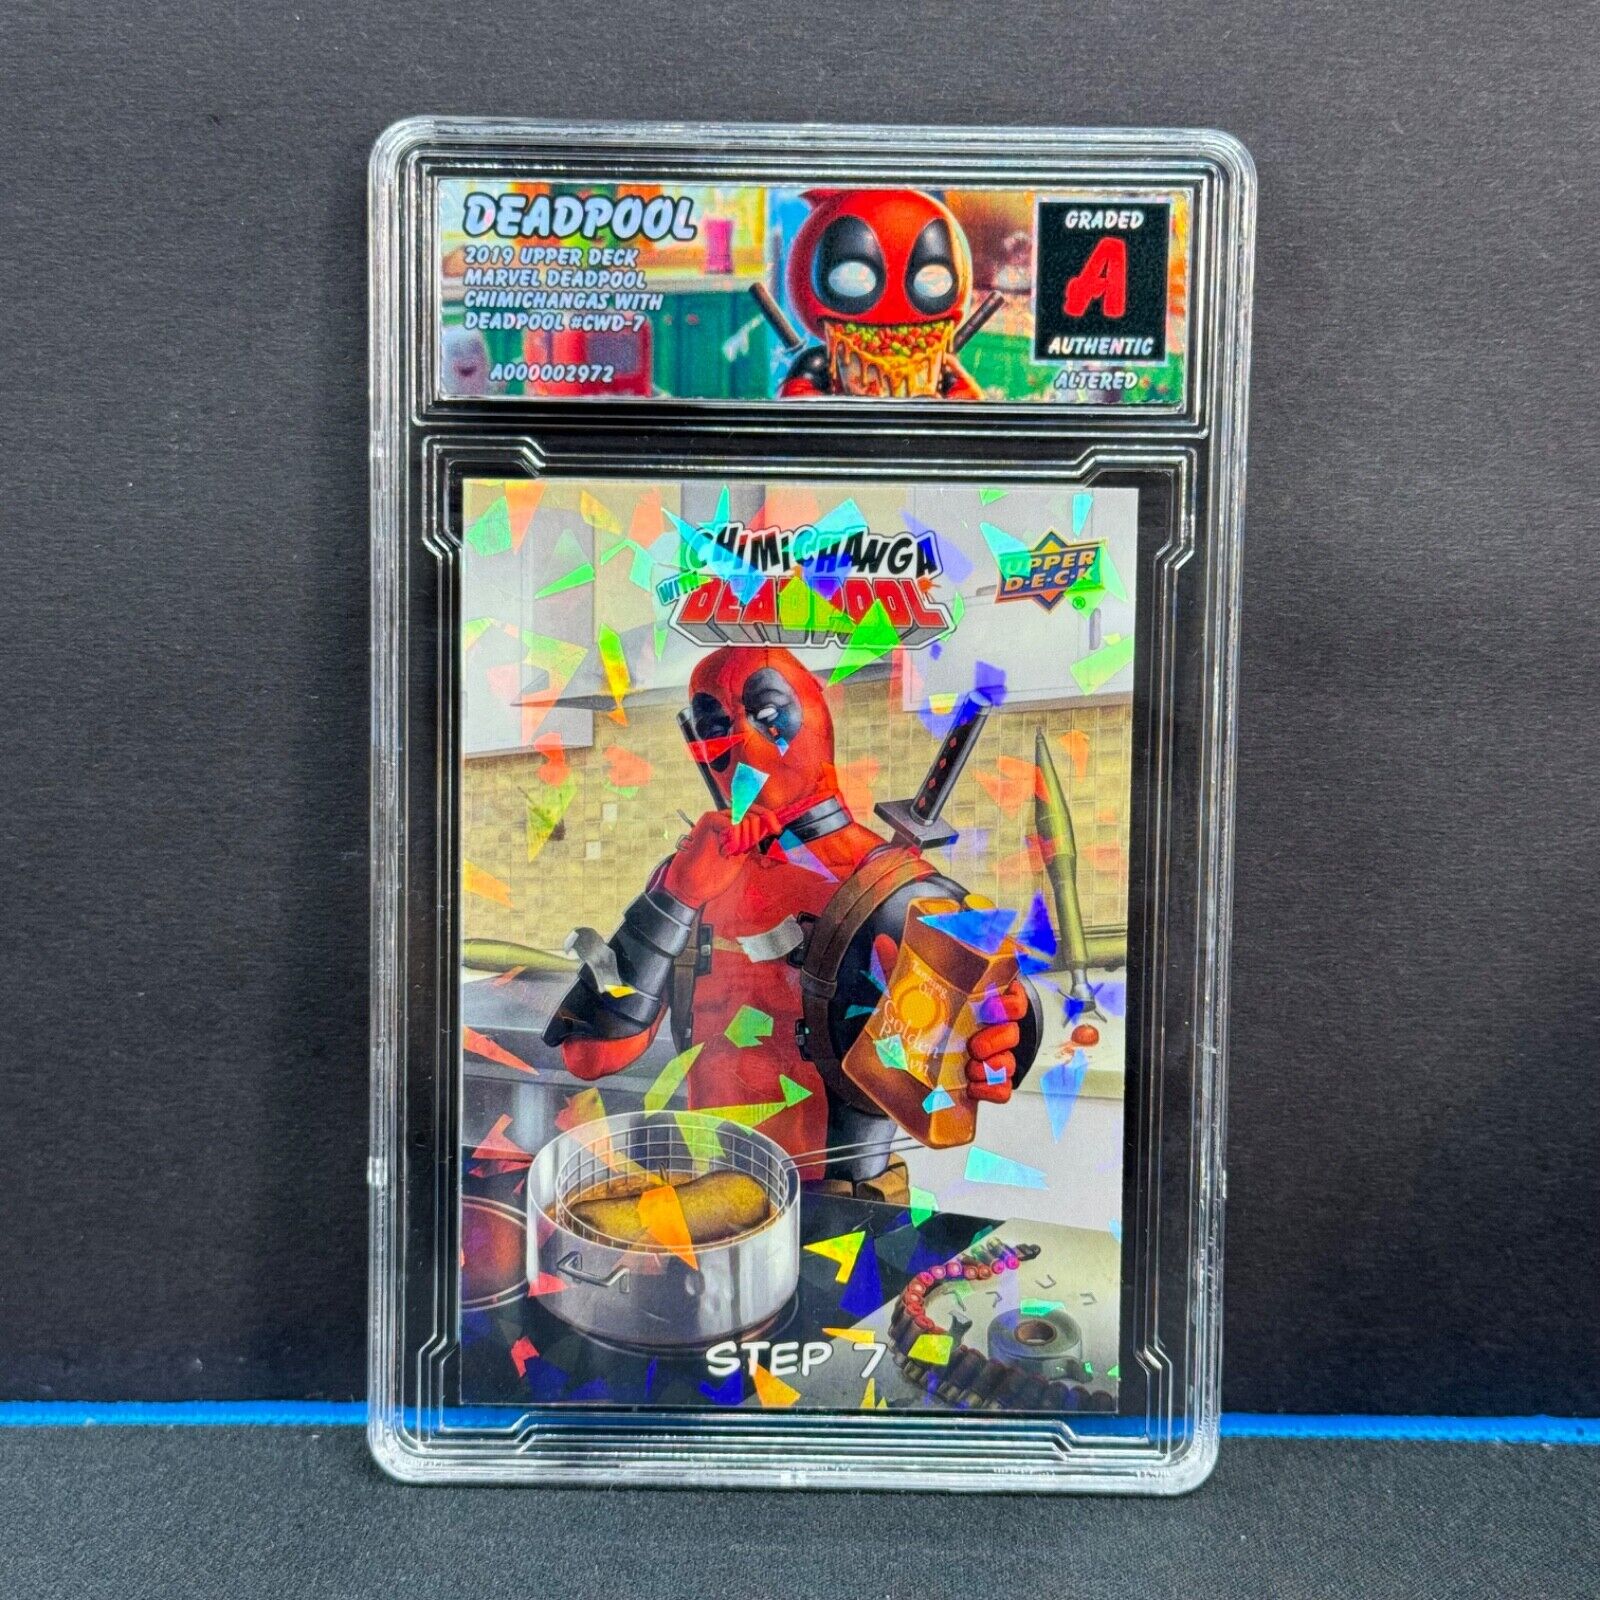 2019 Upper Deck Marvel Deadpool Chimi #CWD-7 Cracked Ice Altered Refractor  